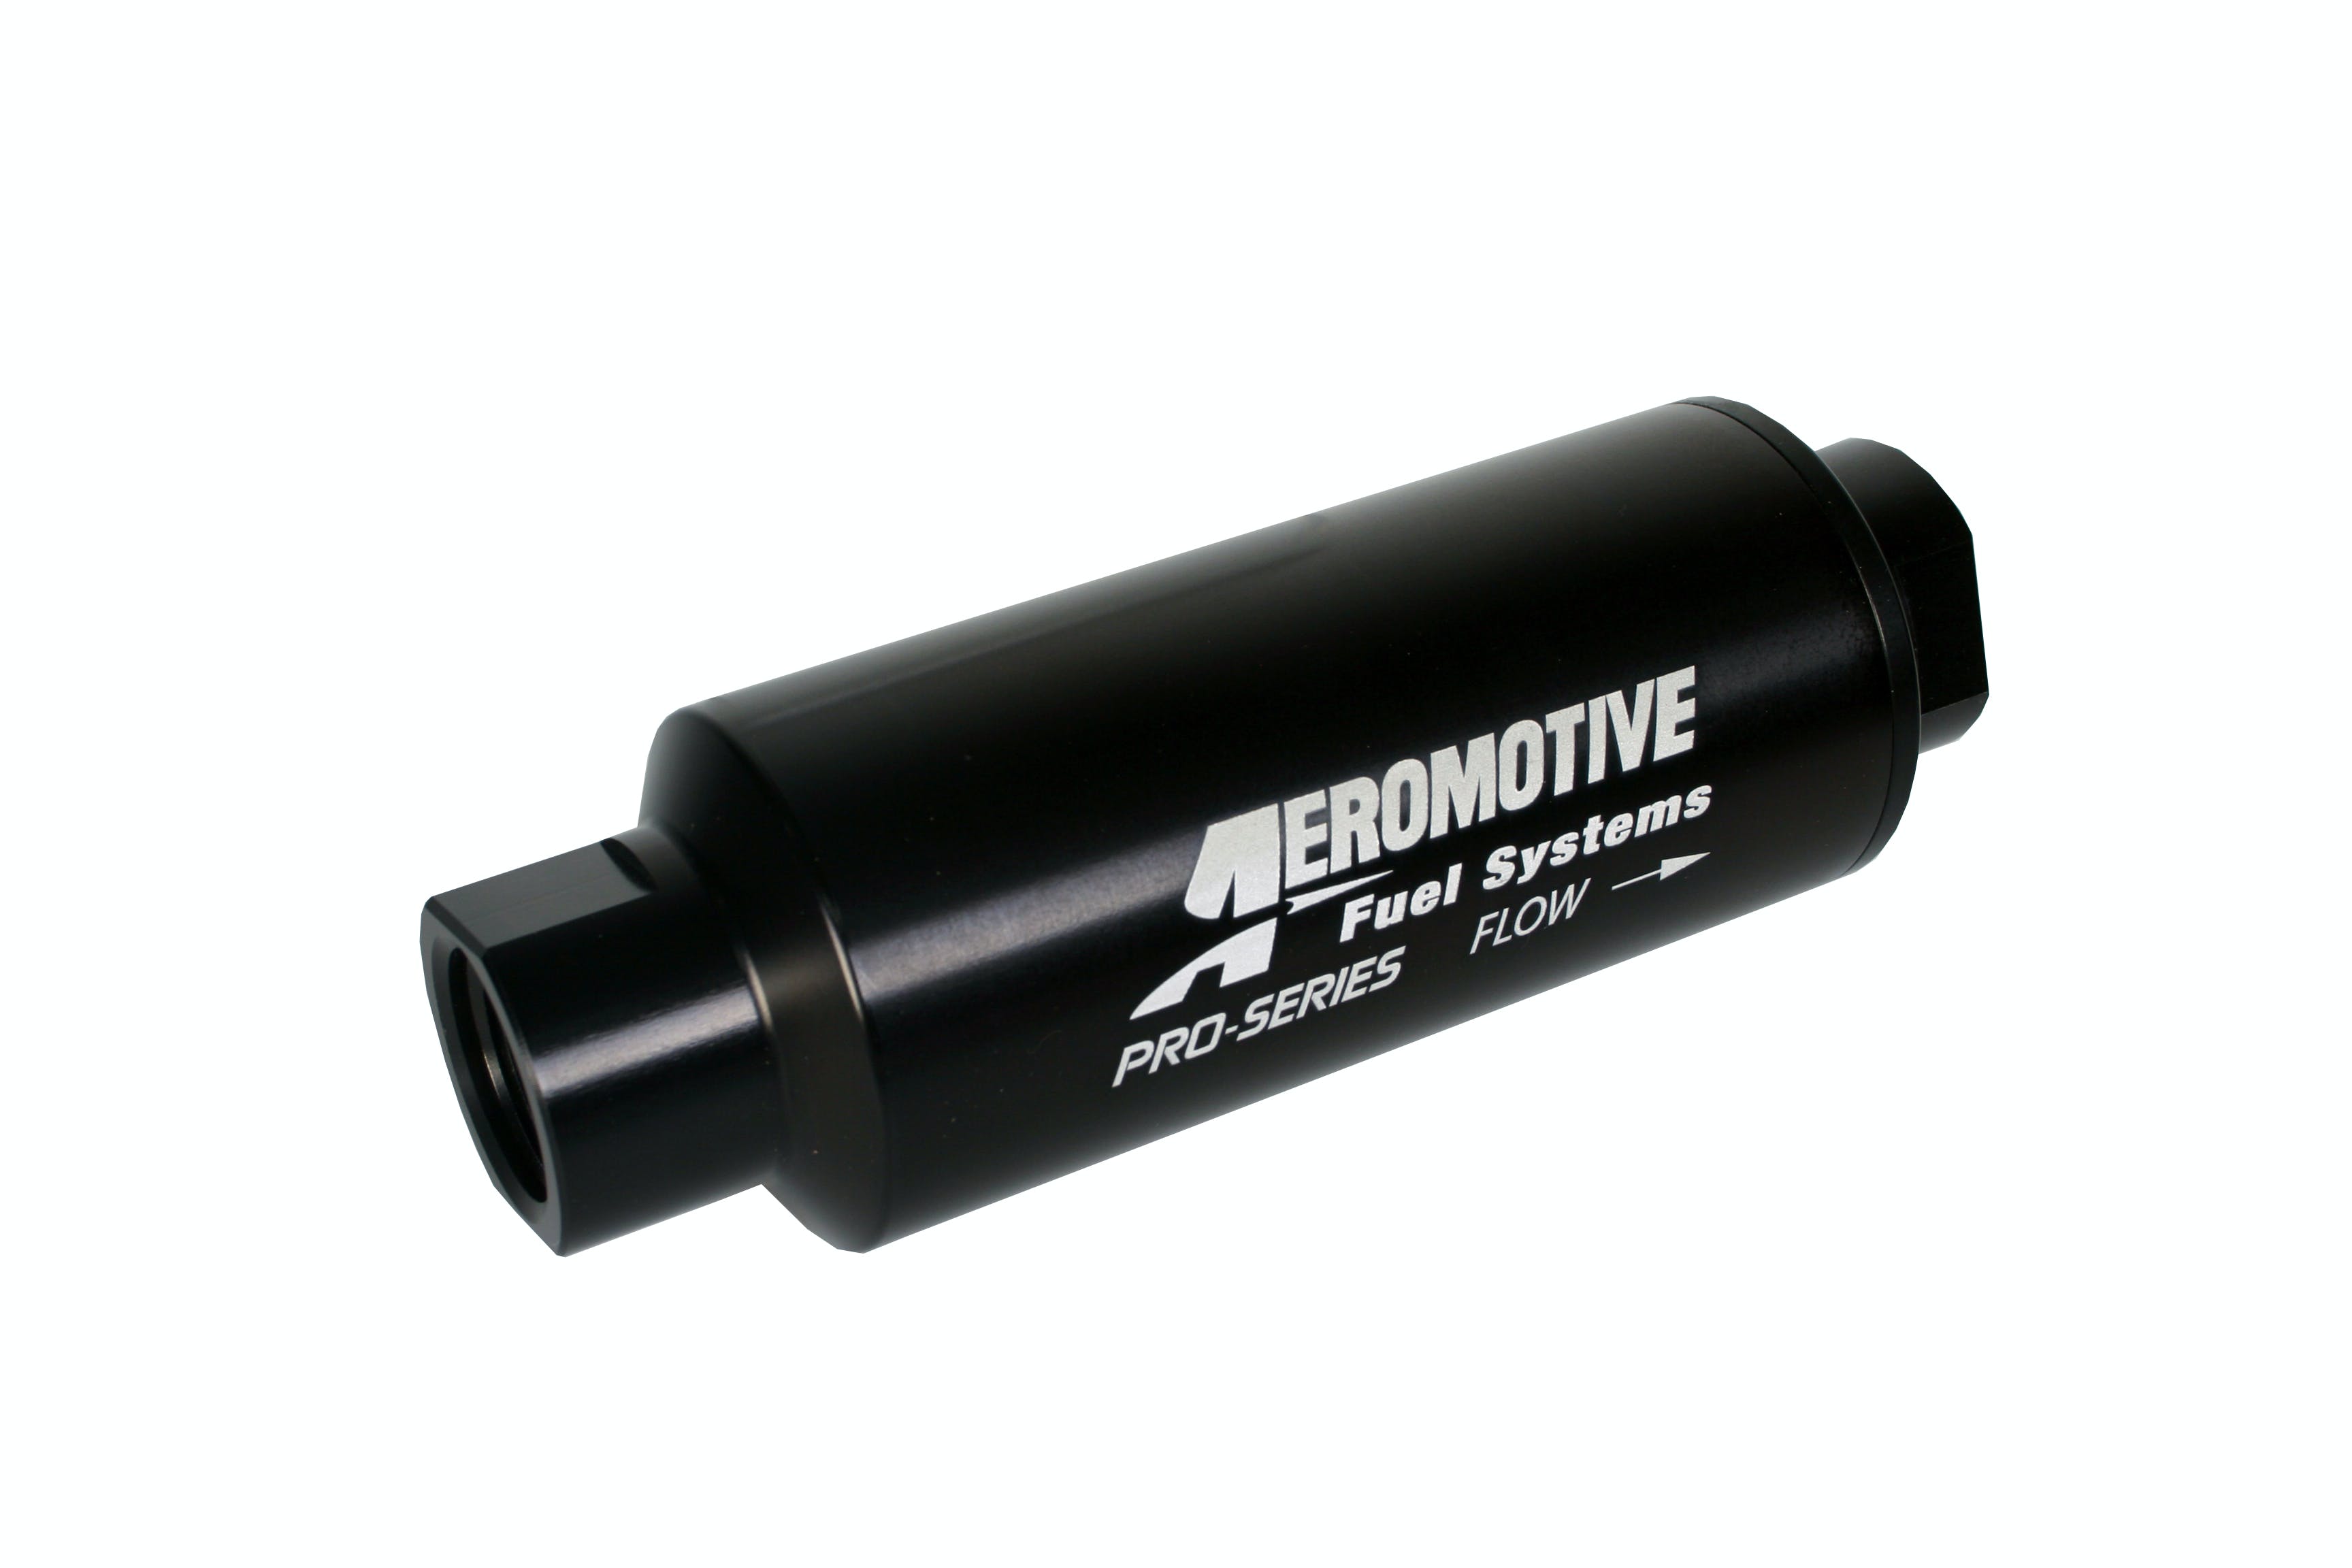 Aeromotive Fuel System 12310 Pro-Series, In-Line Fuel Filter (AN-12) 10 micron fabric element